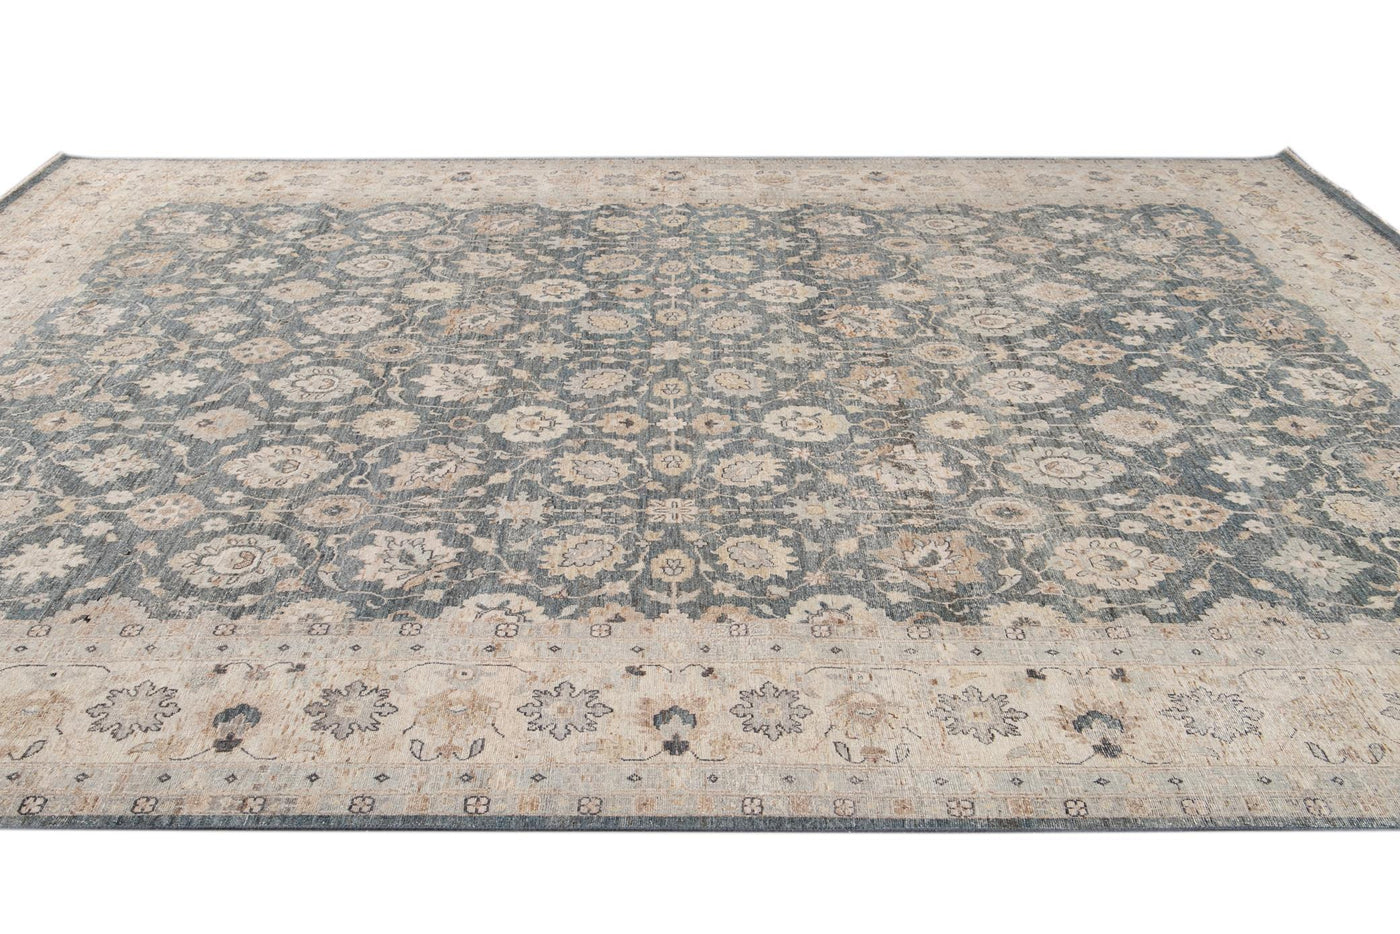 21st Century Contemporary Indian Wool Rug, 12 X 15